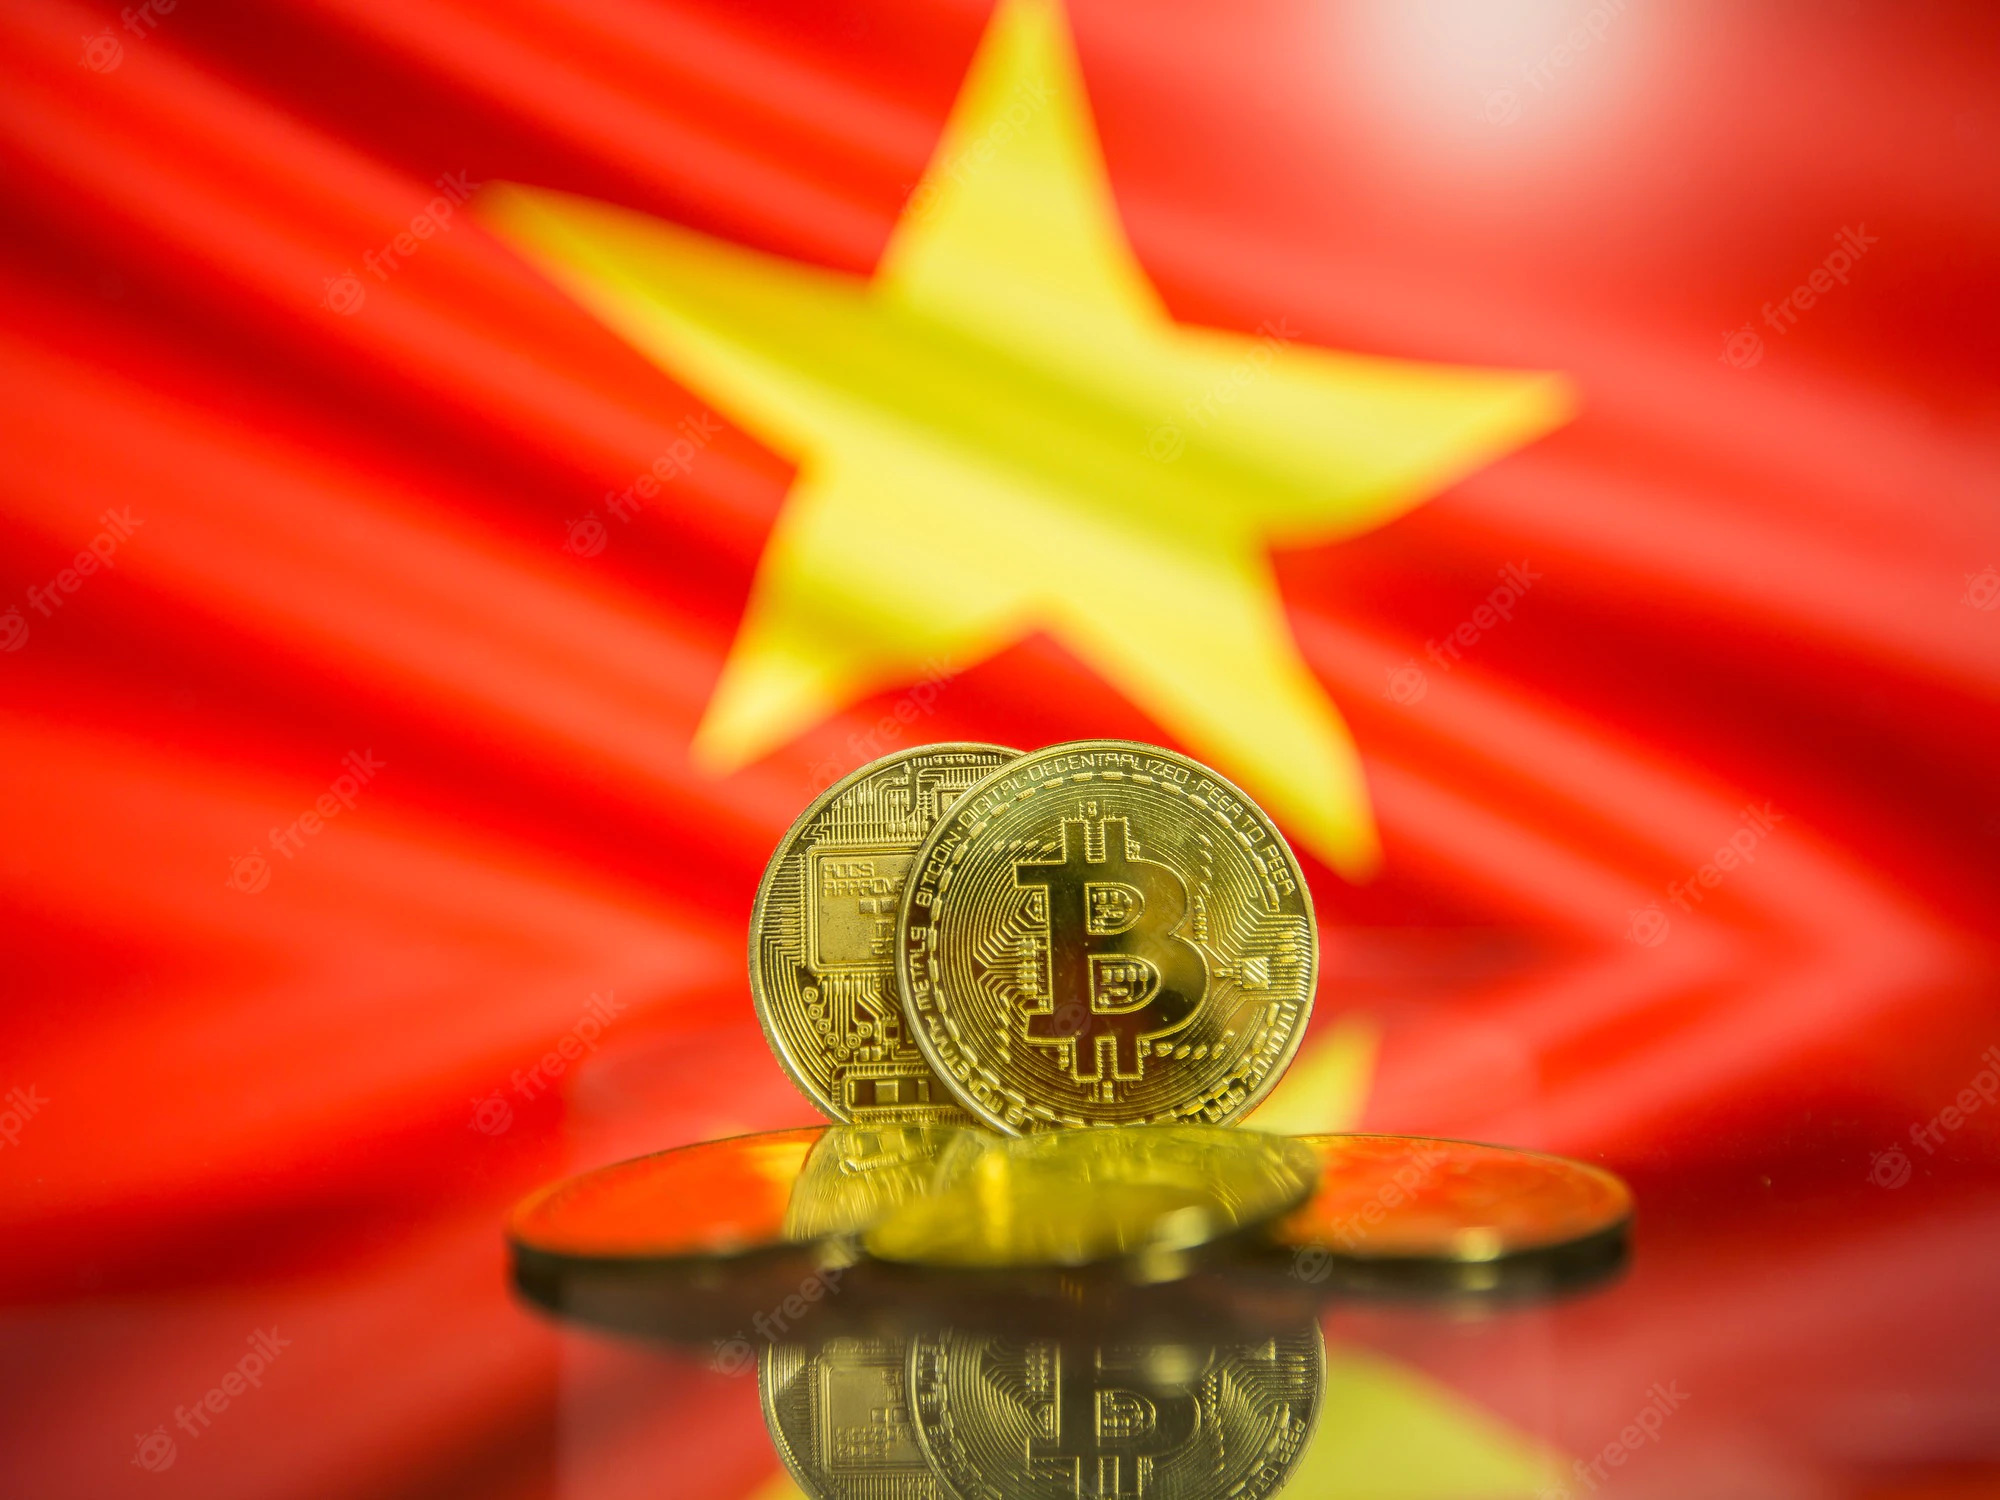 Vietnam continues to hold the throne in terms of global cryptocurrency adoption in 2022